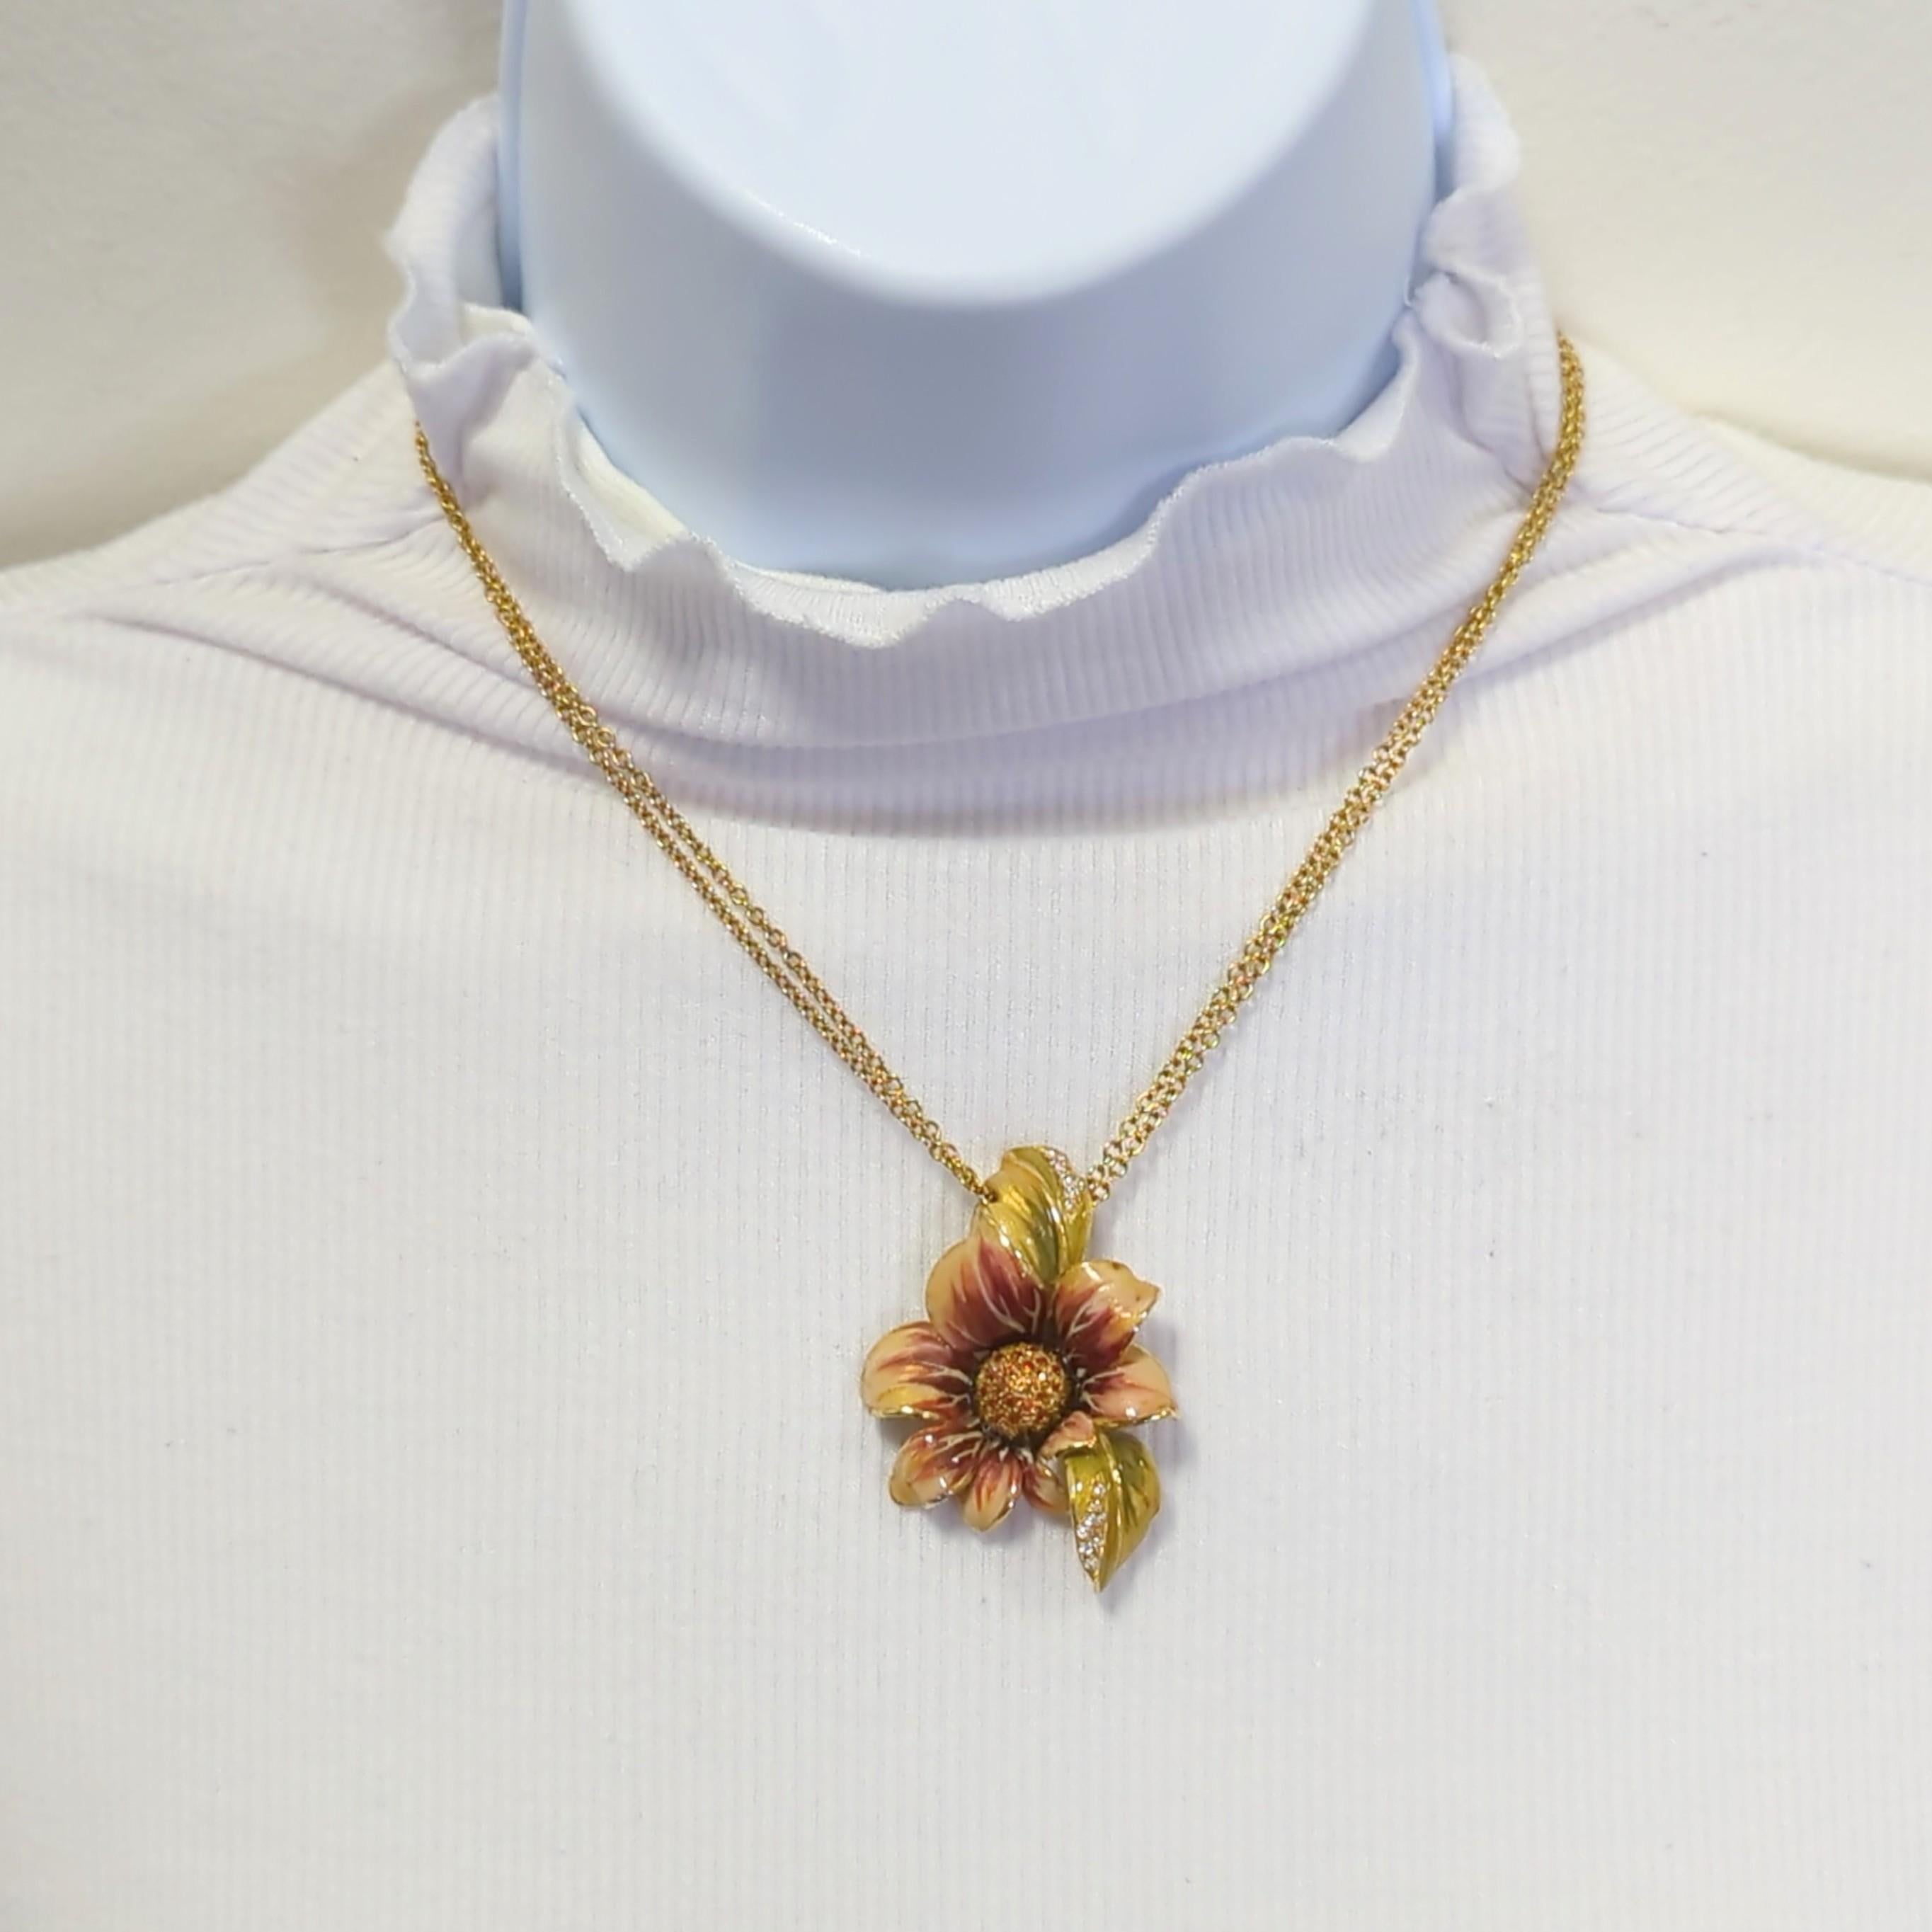 Beautiful flower design pendant with good quality white diamond rounds.  Handmade in 18k yellow gold.  Length is 16